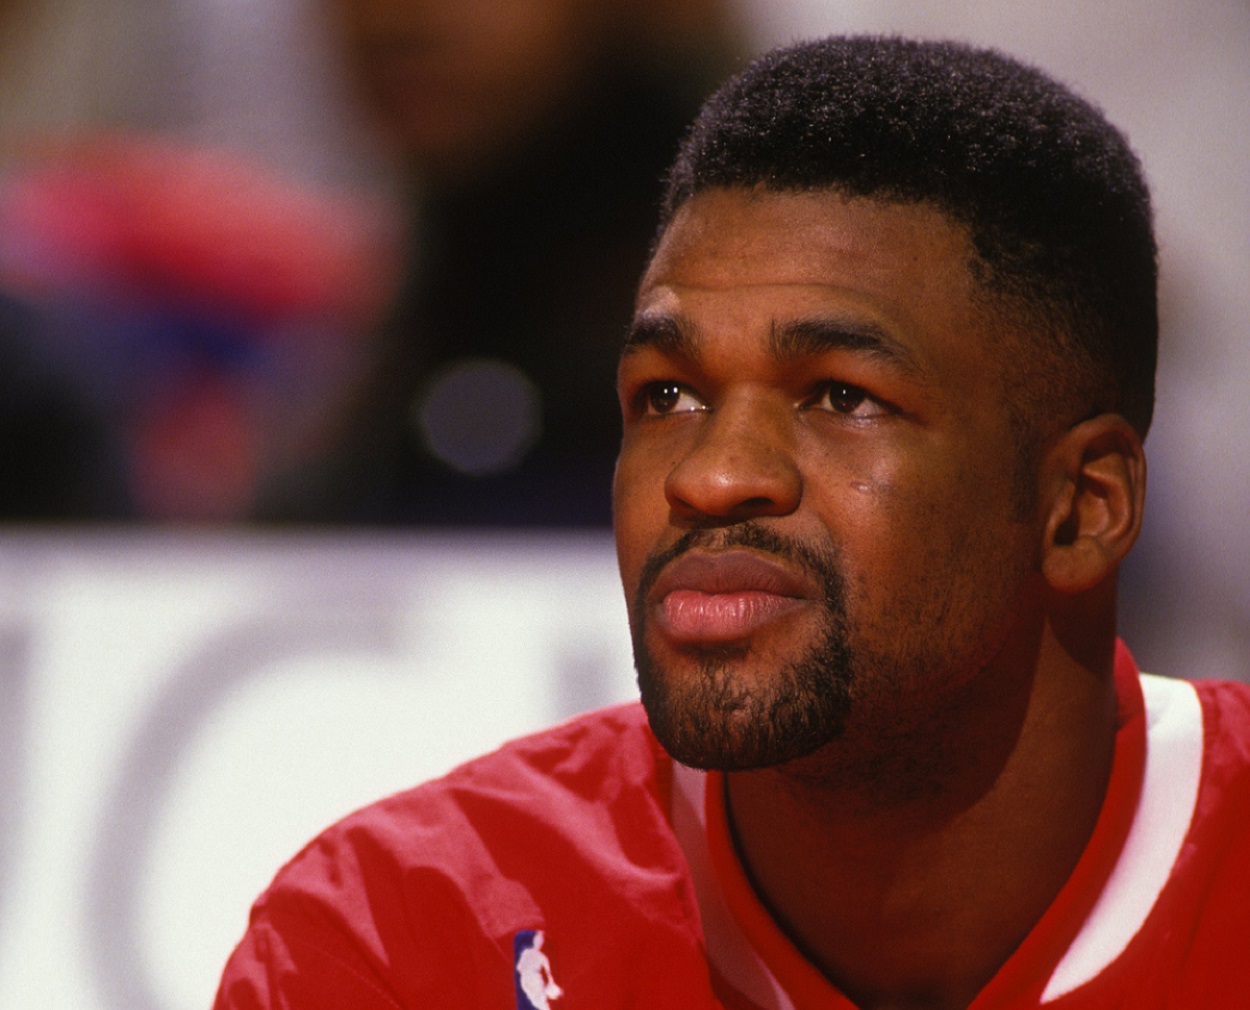 Pete Myers looks on during a Chicago Bulls-Washington Bullets matchup in February 1994